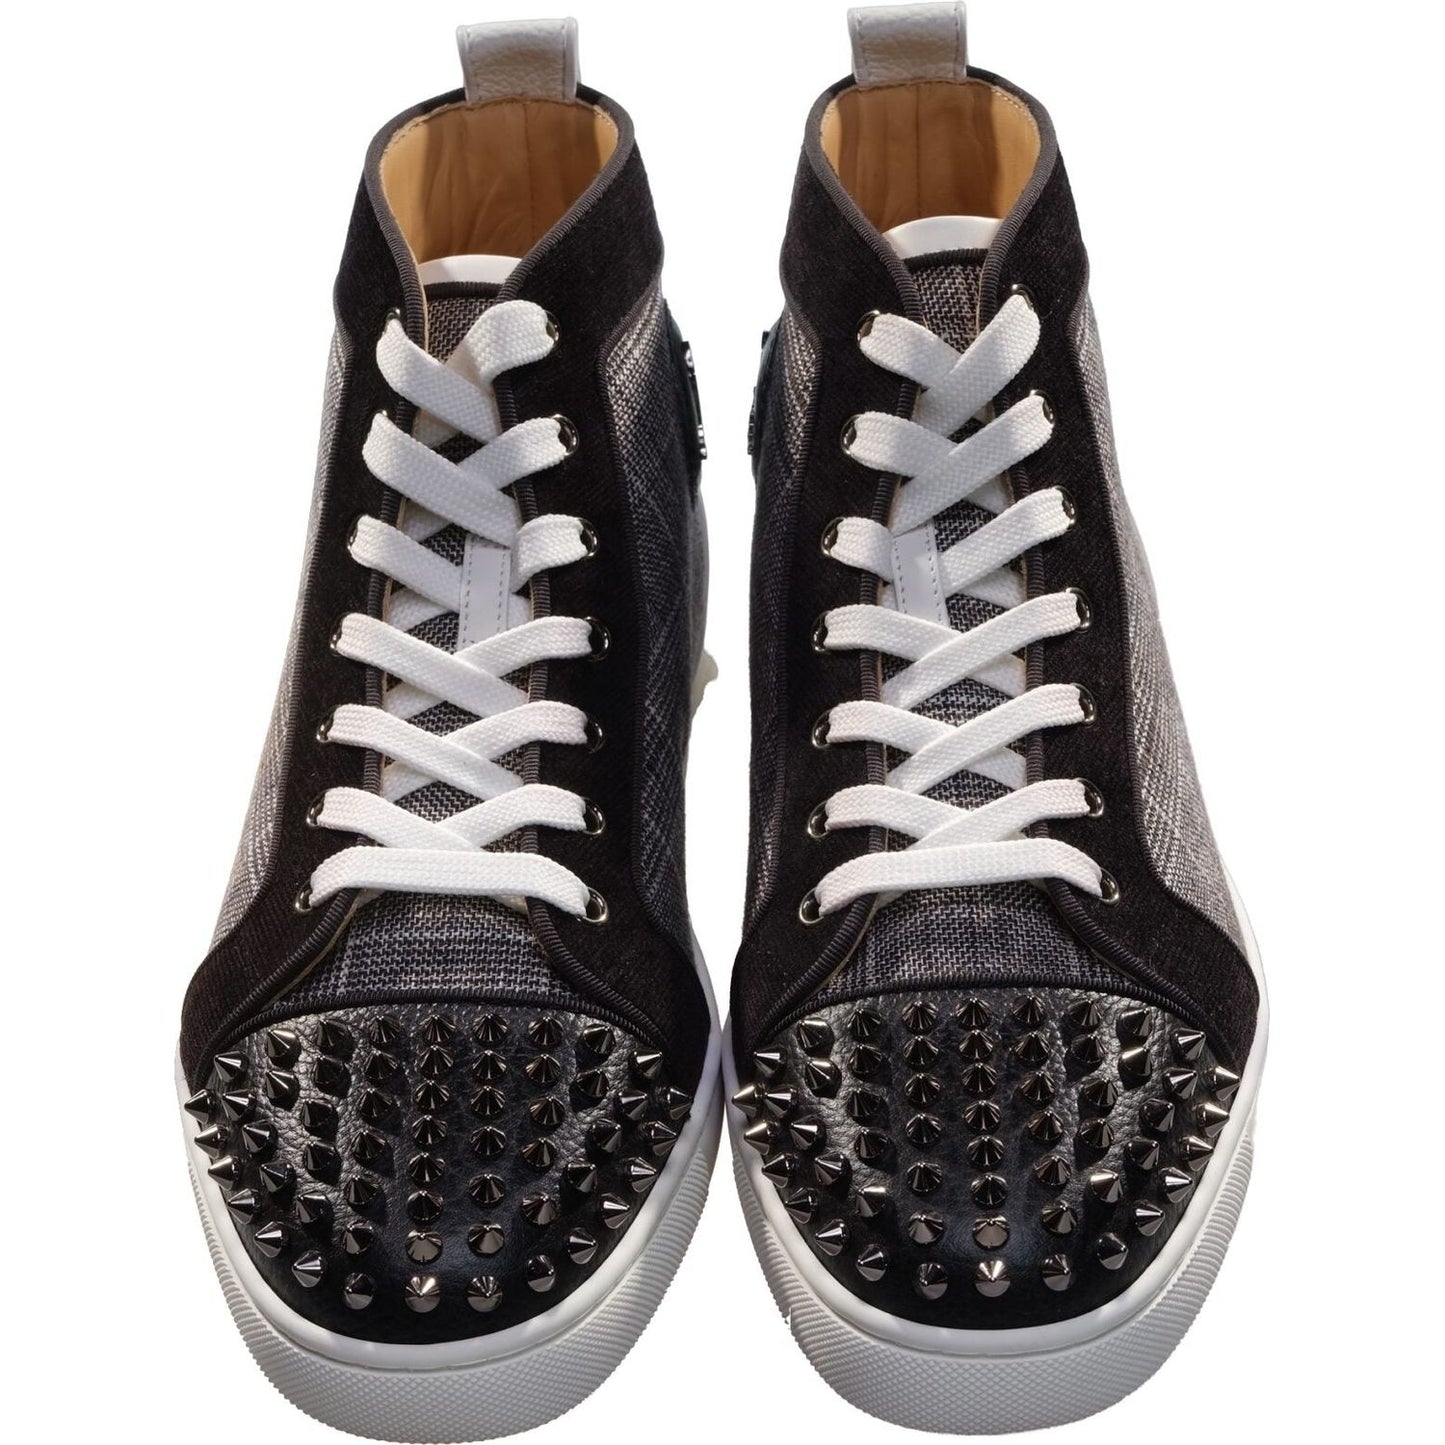 Lou Spikes Orlato Flat Contrast and Studded High Top Sneakers